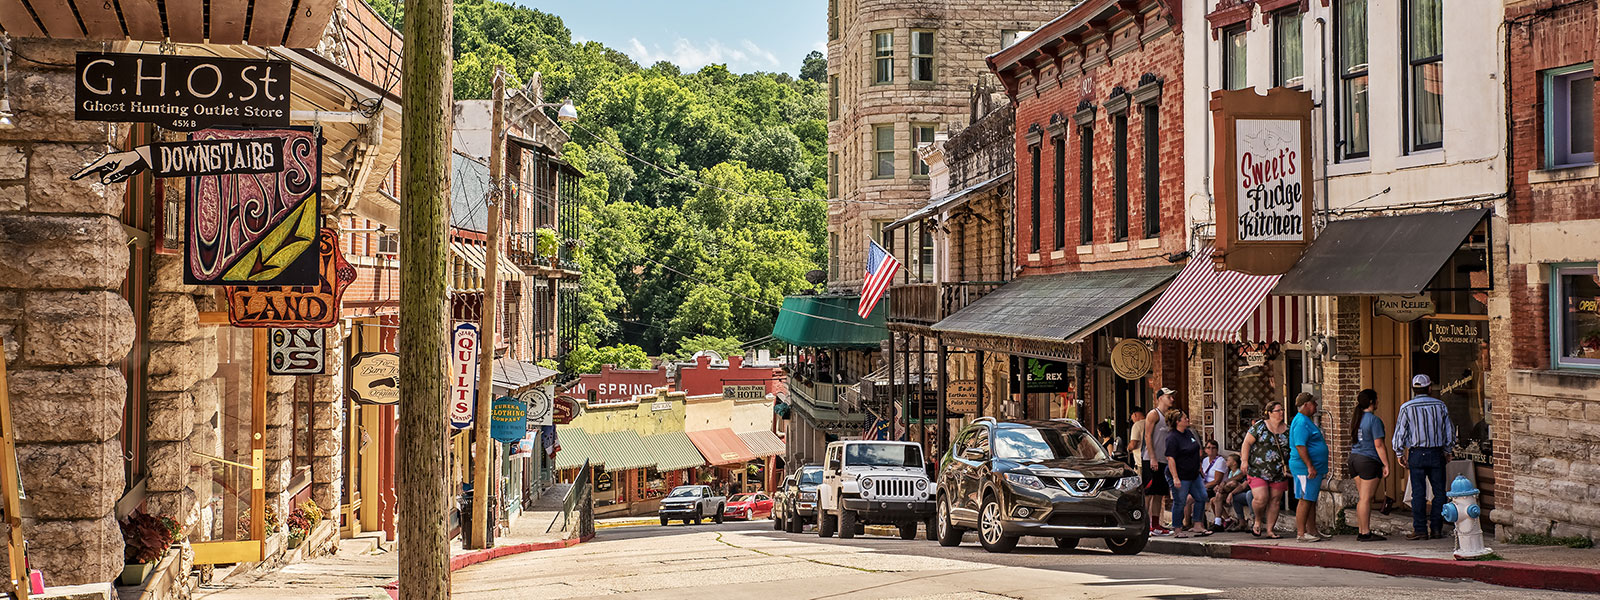 50 Incredible Things To Do In Eureka Springs You Can't Miss!